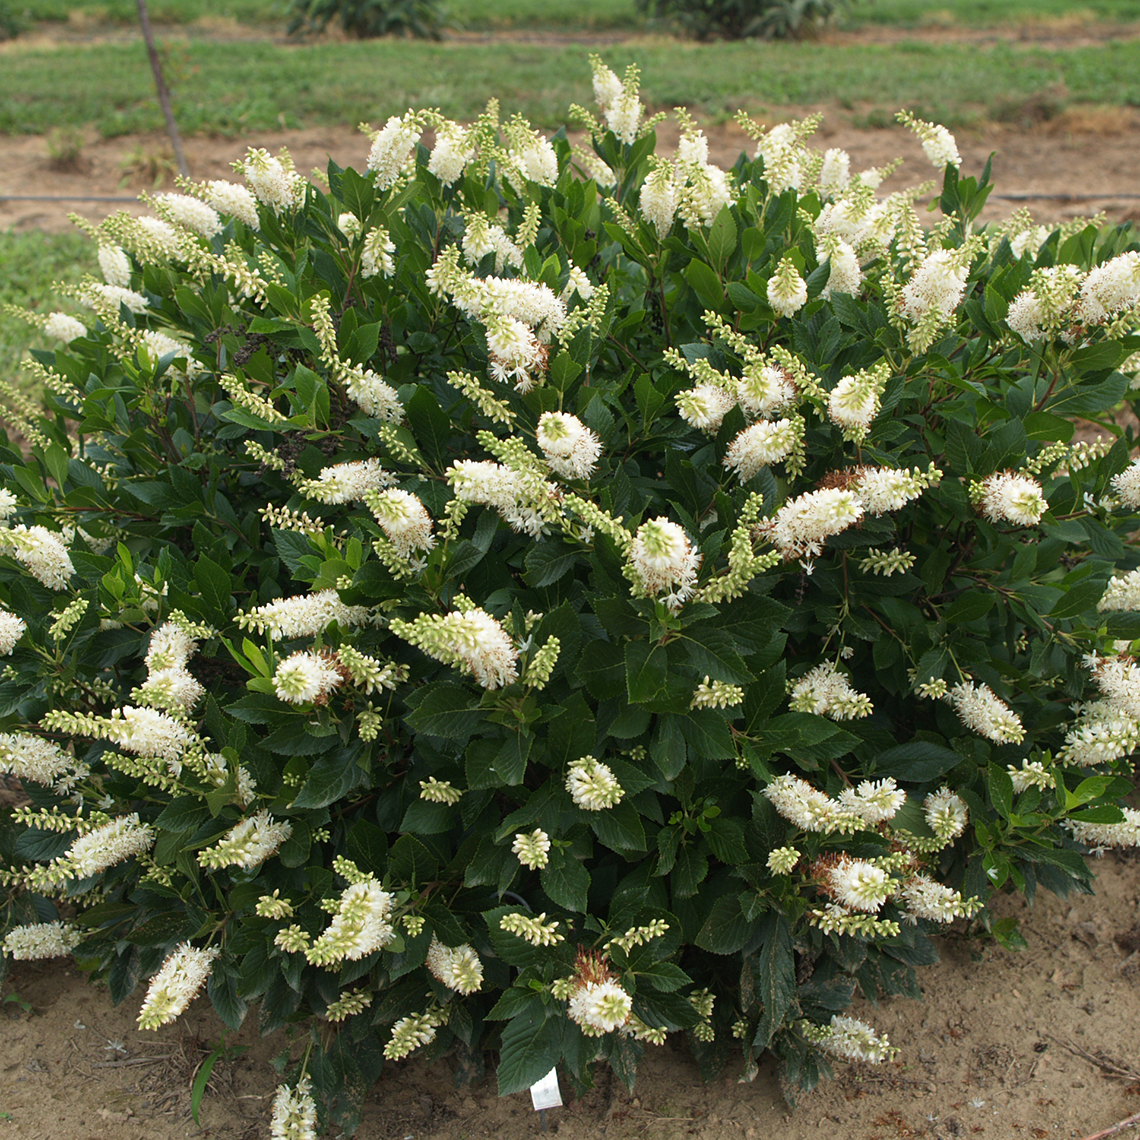 In bloom Sugartina Crystalina Clethra in trial field